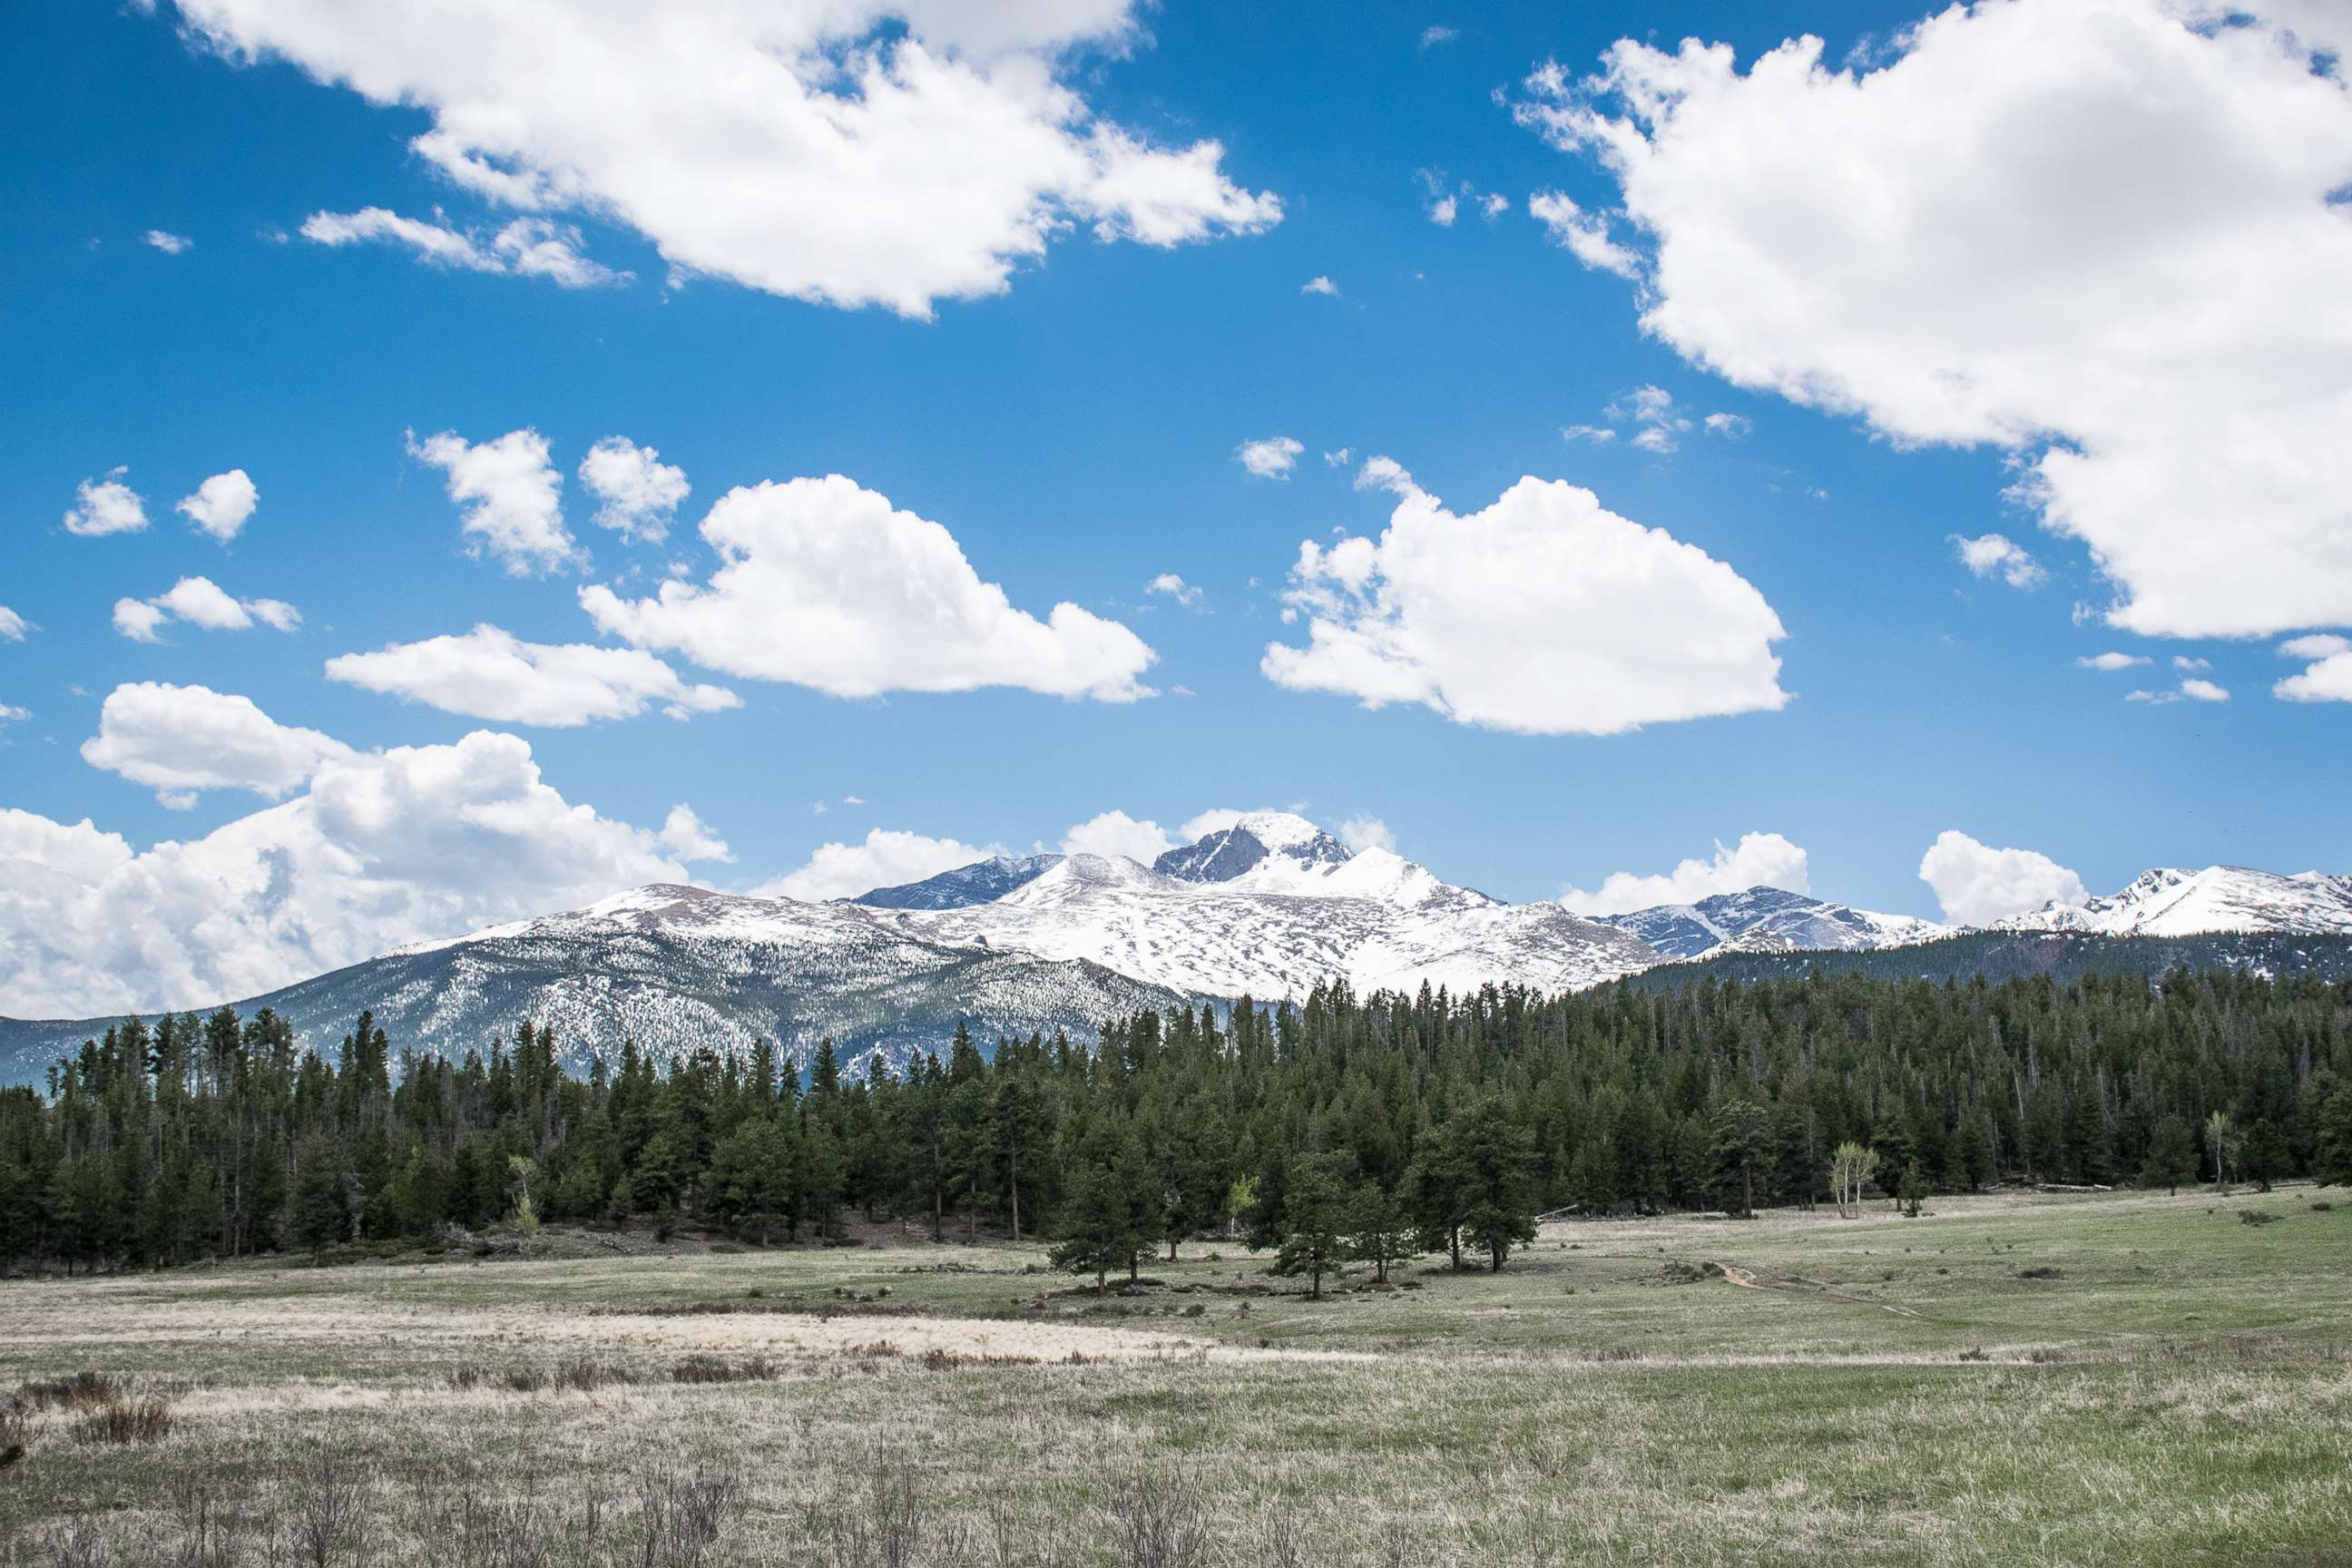 PHOTO: The entrance landscape of the natural hiking trail Upper Beaver Meadows provides a view of the mountains in Rocky Mountain National Park in Colorado.